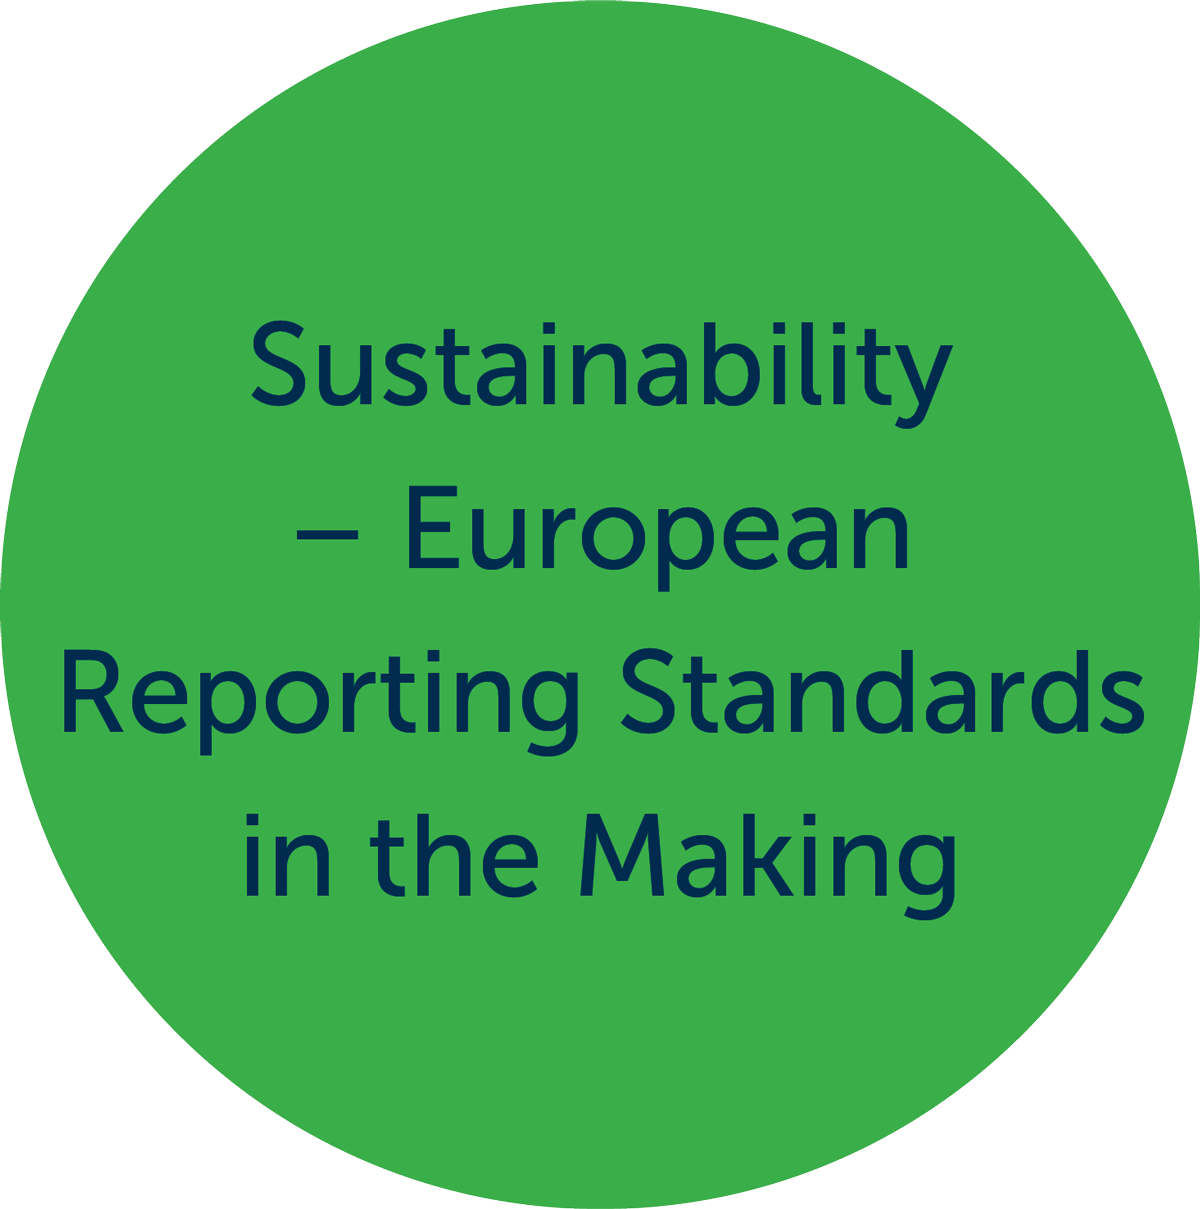 Sustainability - European Reporting Standards in the Making